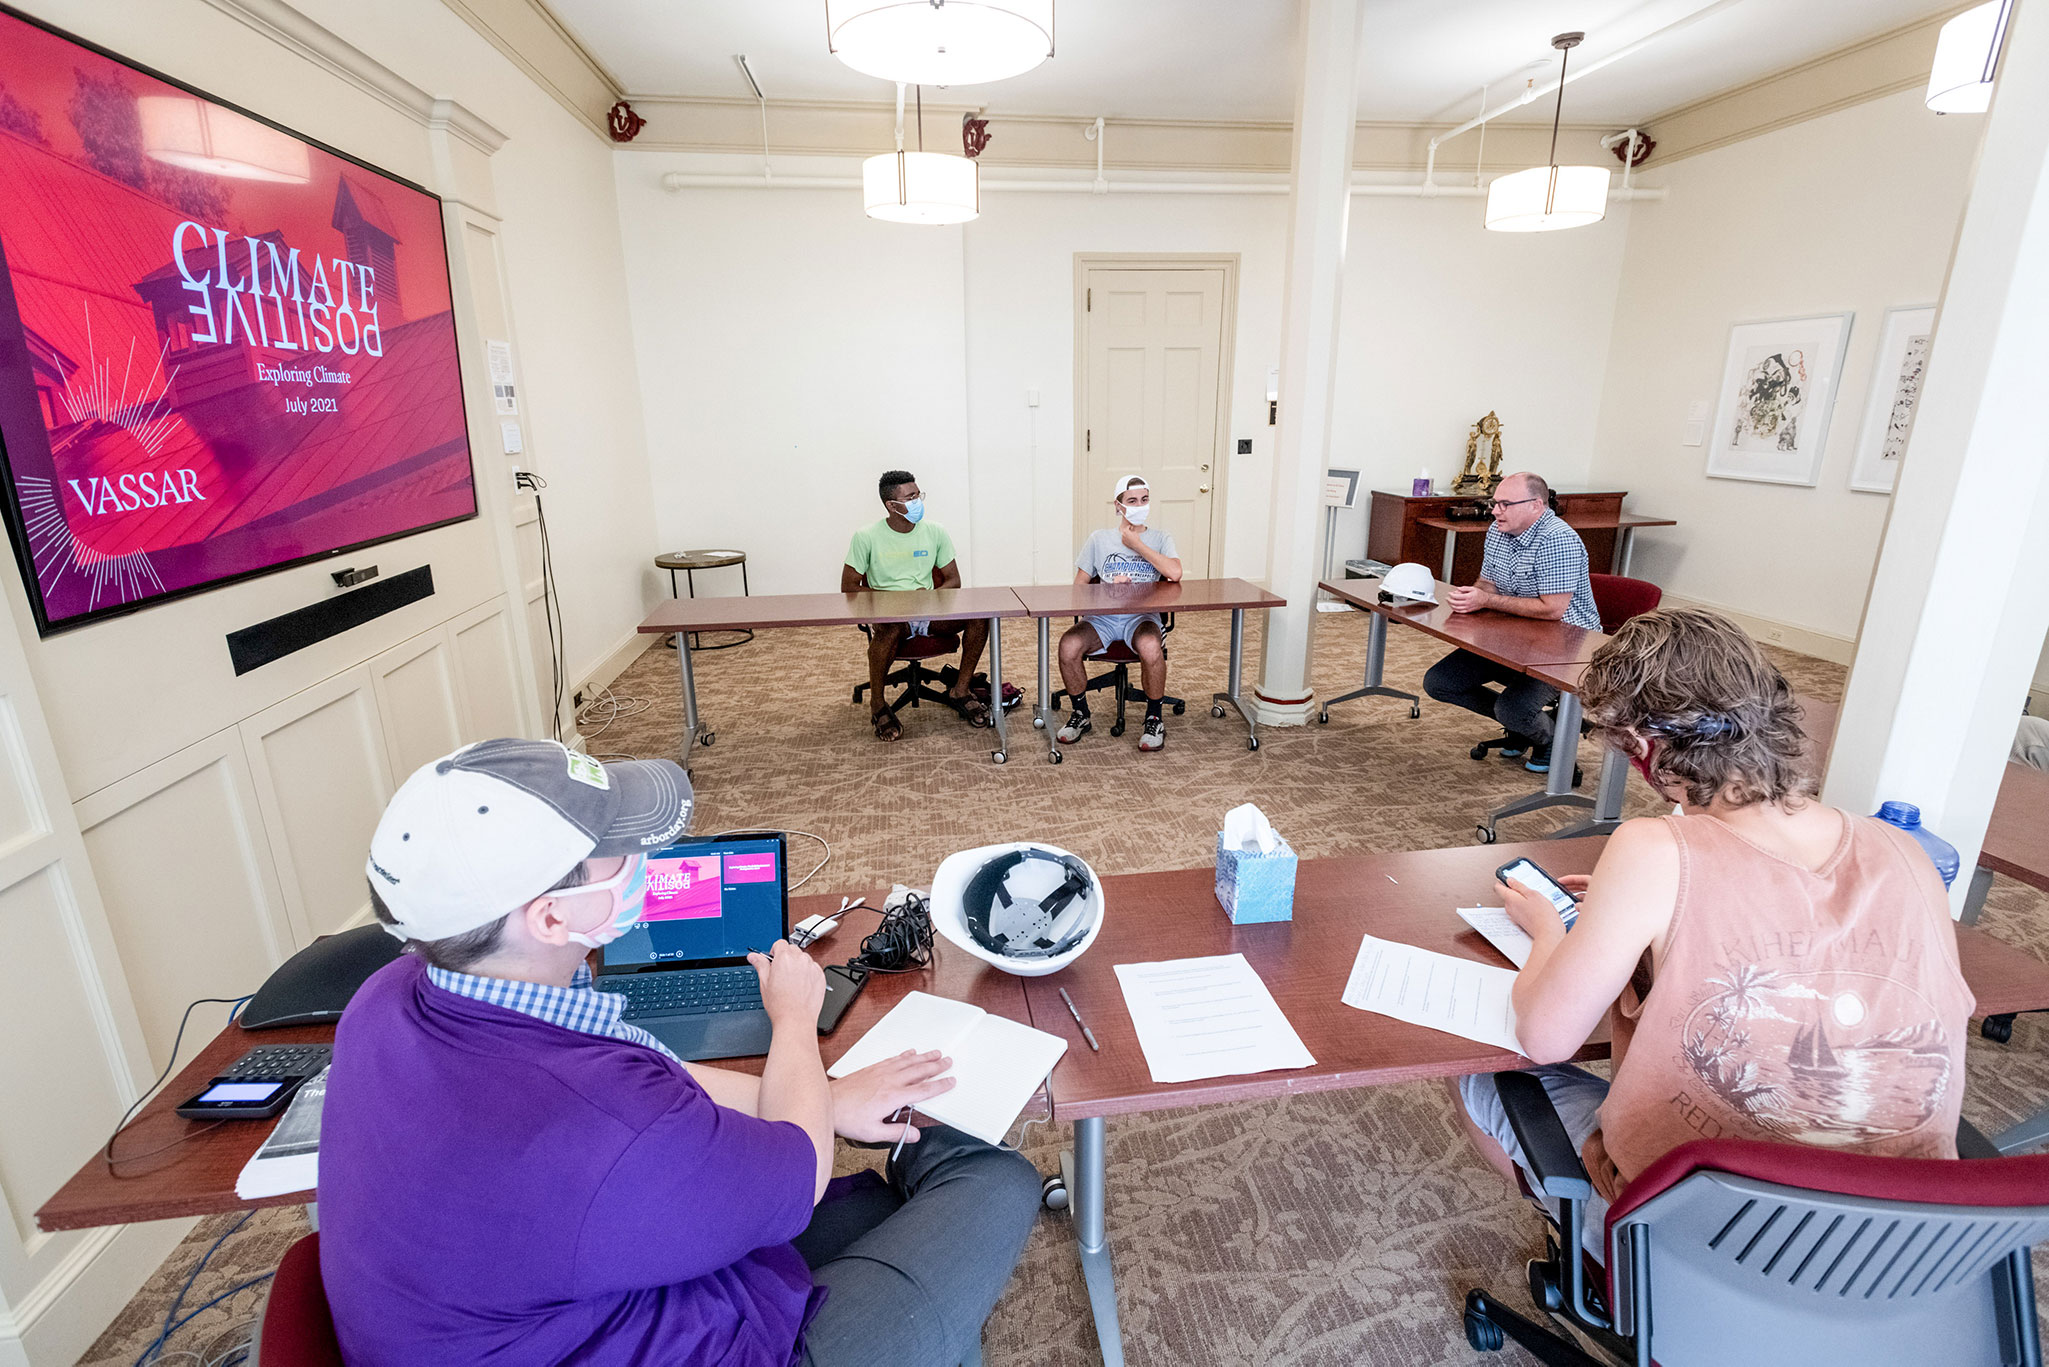 Bryan Corrigan (far right), Project Manager for Vassar’s Office of Facilities and Operations, addressed Exploring College students on the challenges the College faces renovating some of its older buildings to make them energy-efficient.